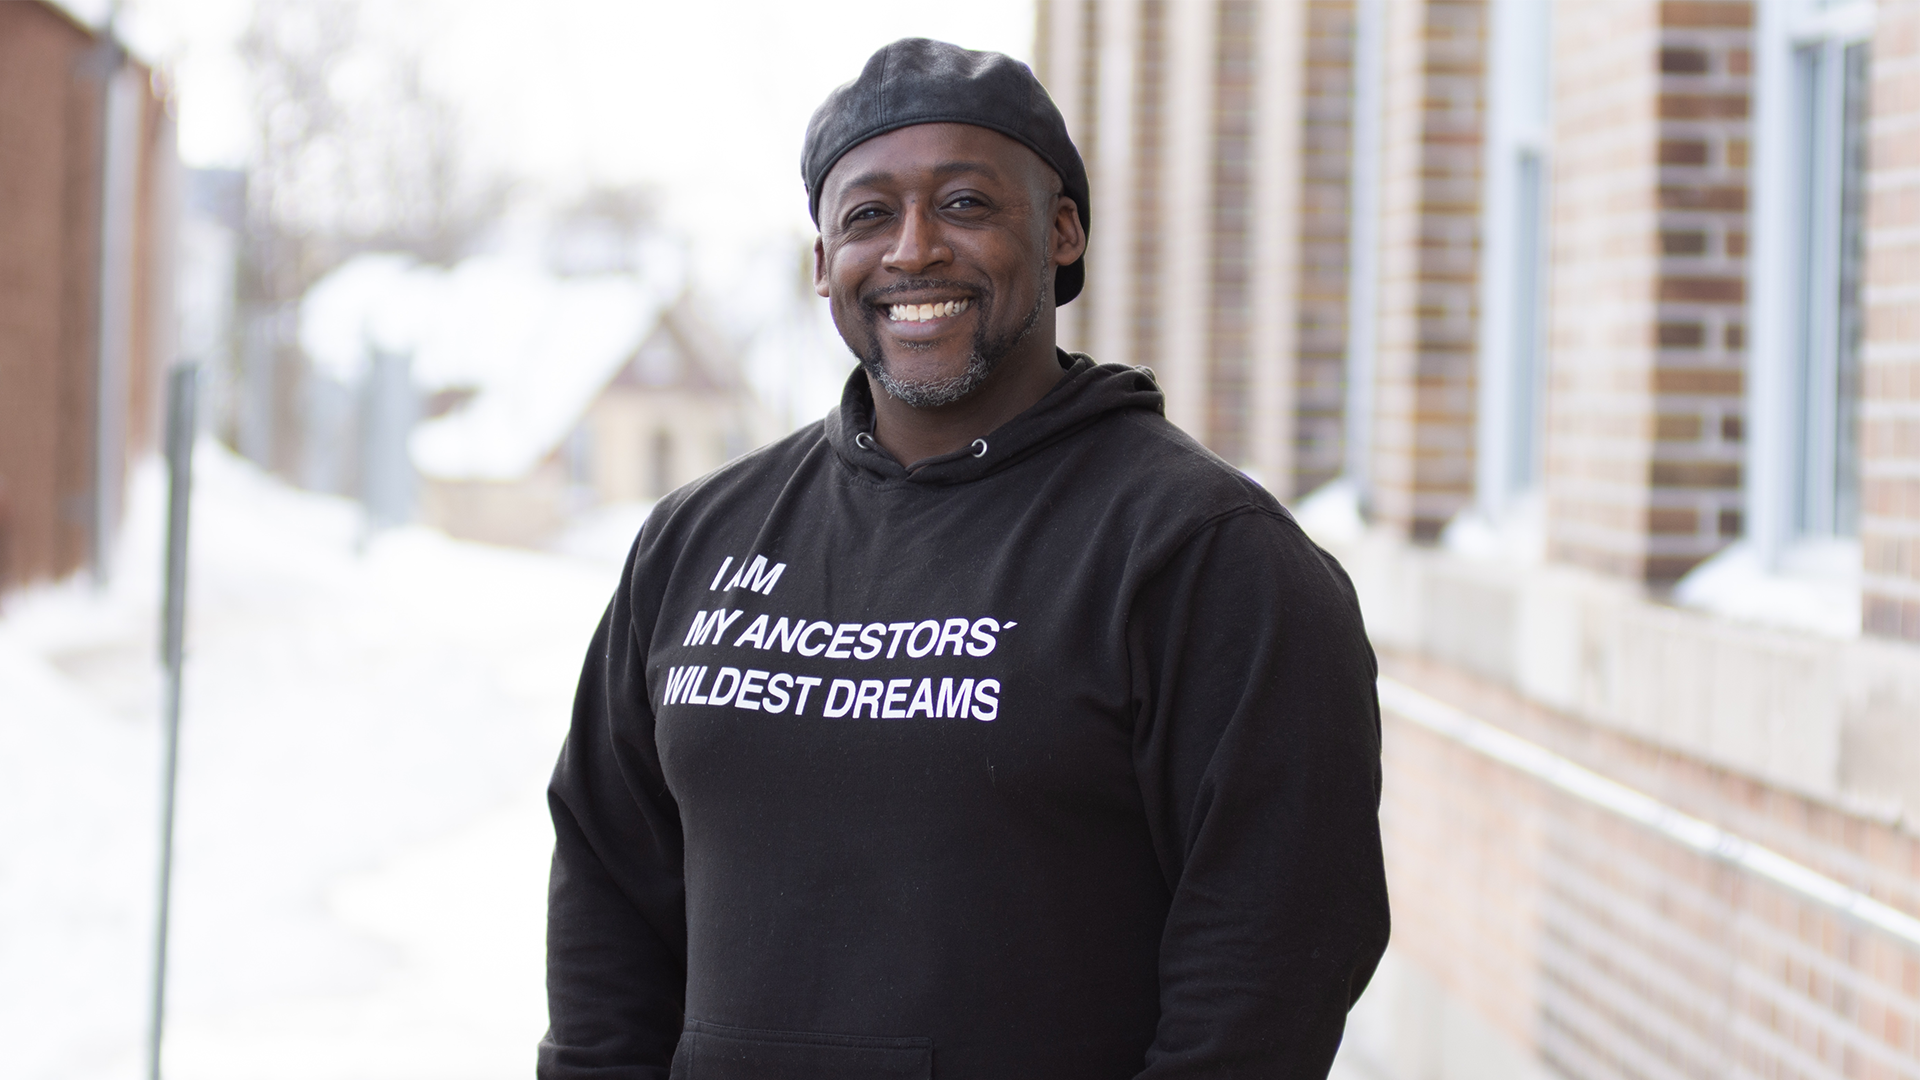 Photo of Chris Ashley. He is wearing a sweater that says "I am my ancestors' wildest dreams."